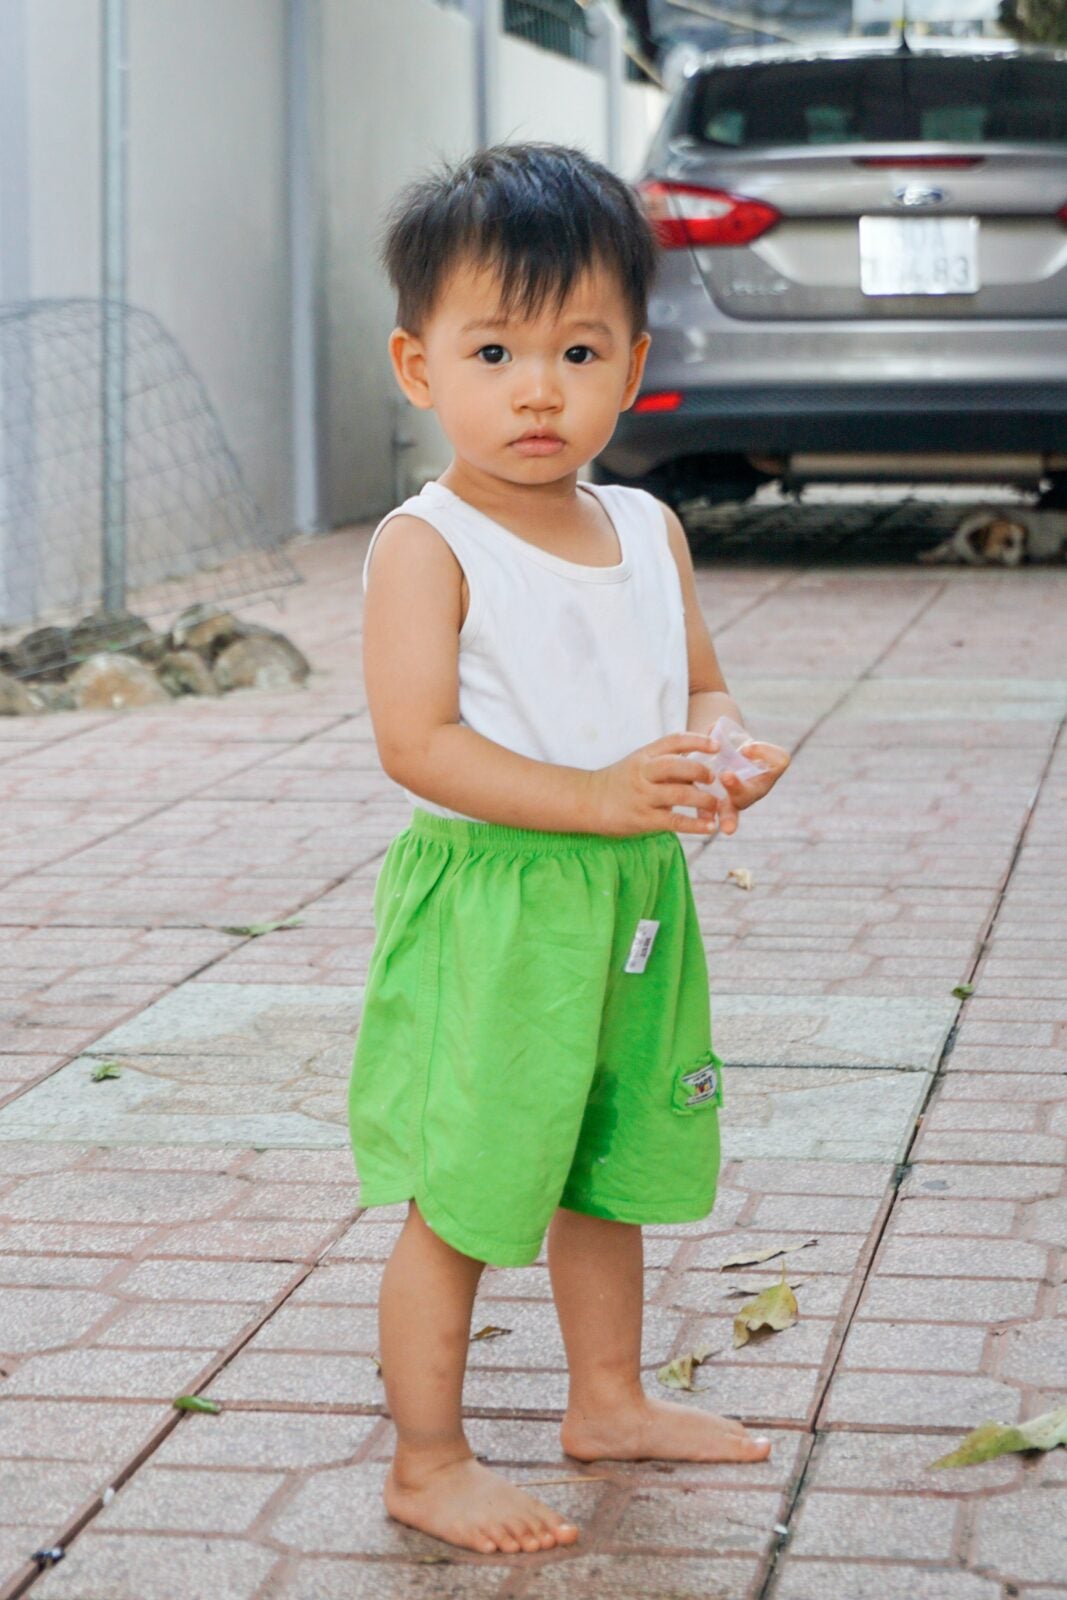 A young Asian boy in green shorts and white tank shirt standing in a driveway holding a plastic cup.